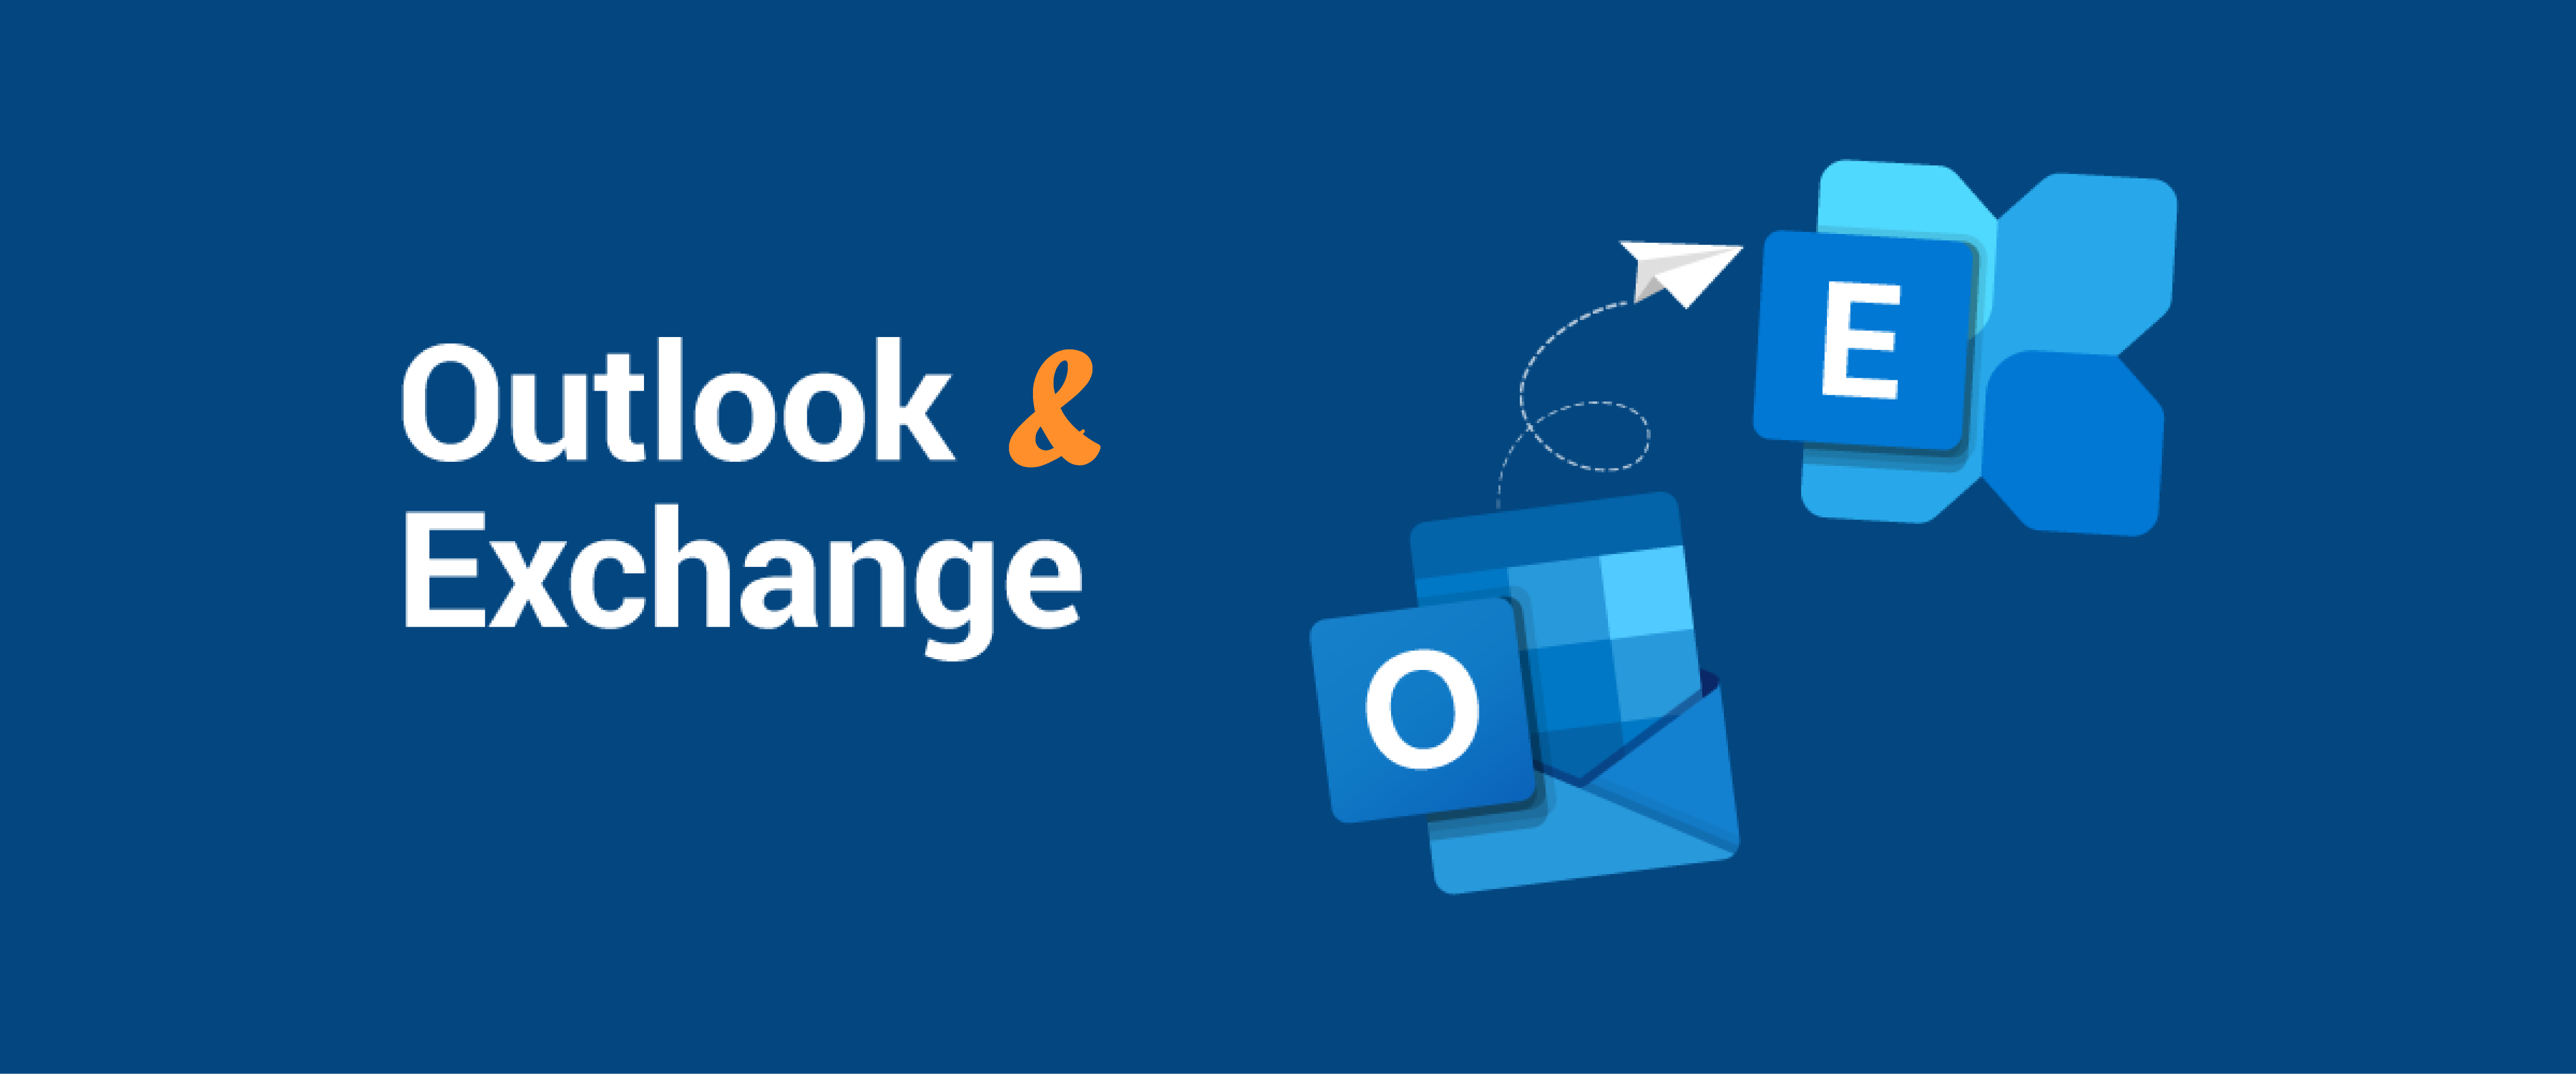 Microsoft Outlook and Exchange for email